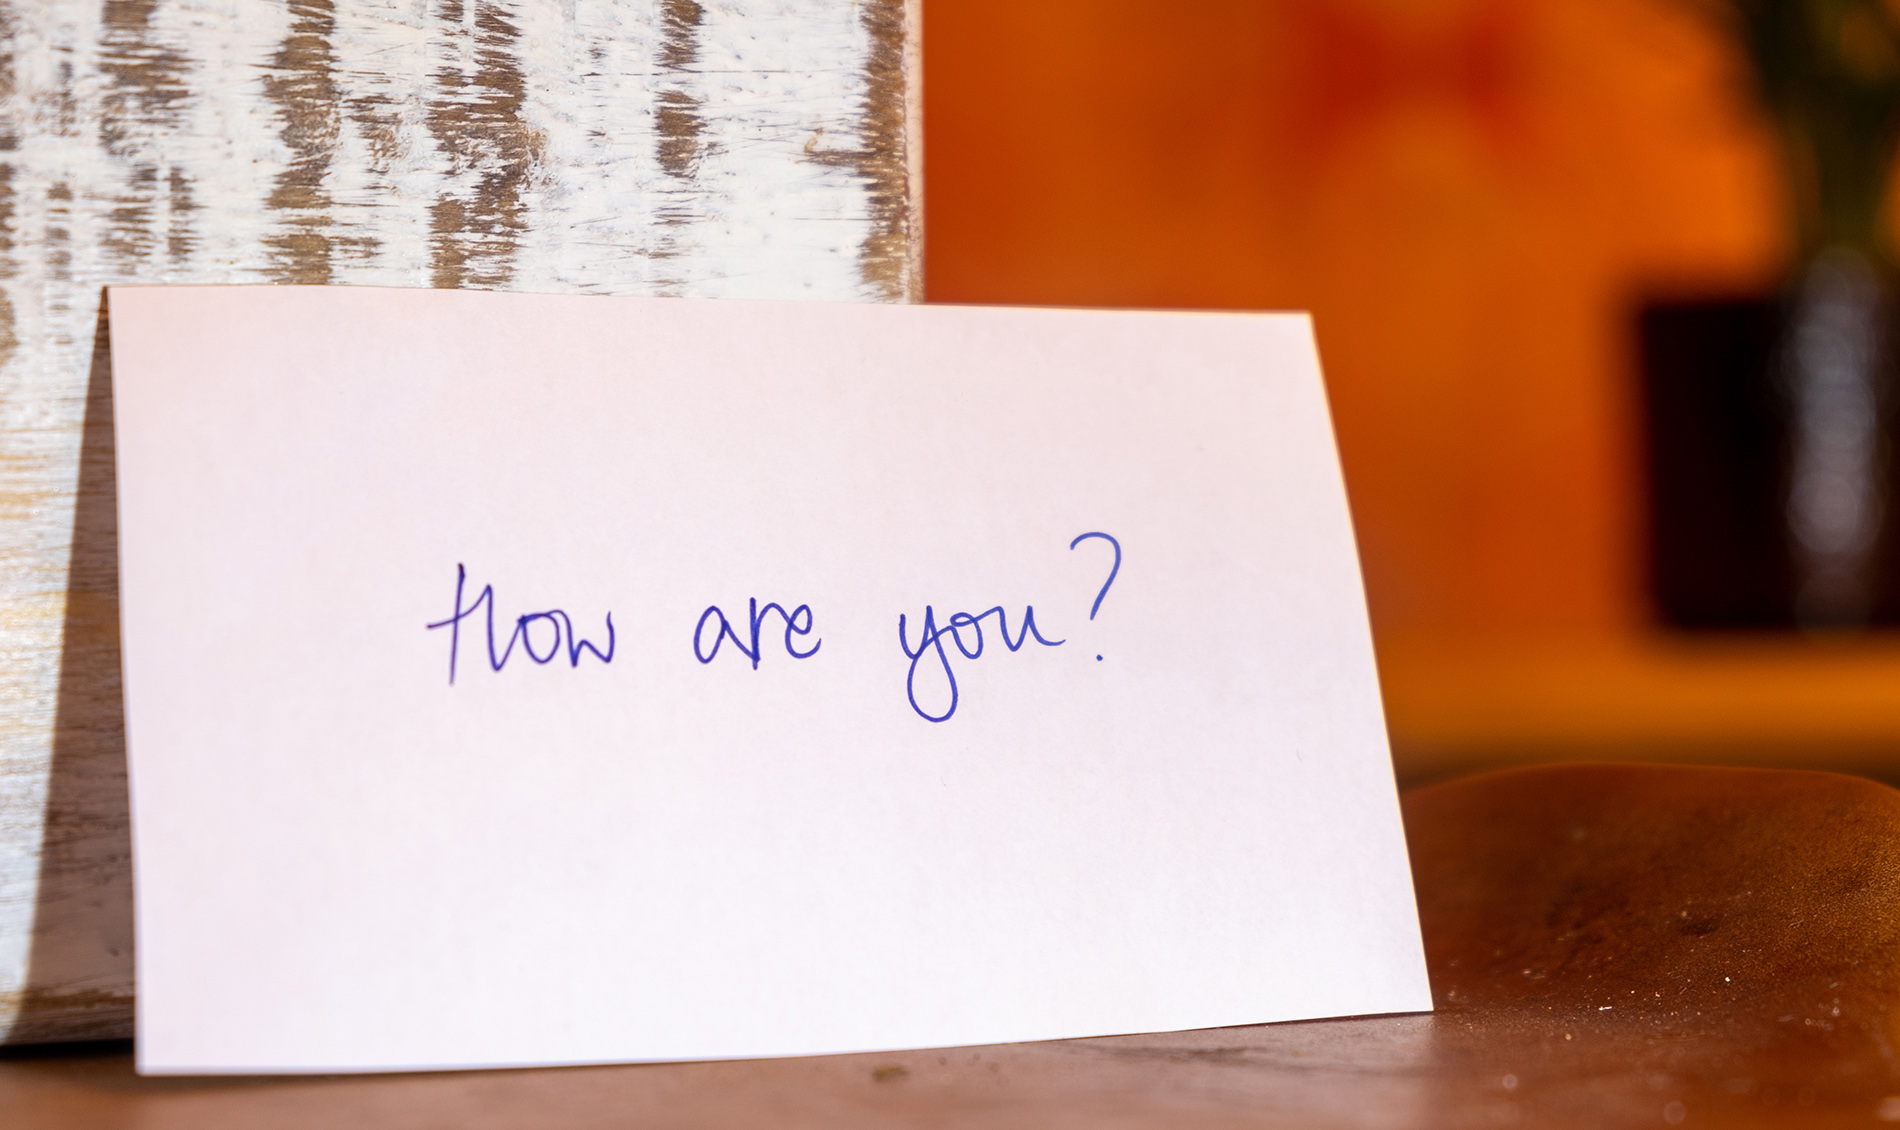 Handwritten note that says "How are you?"